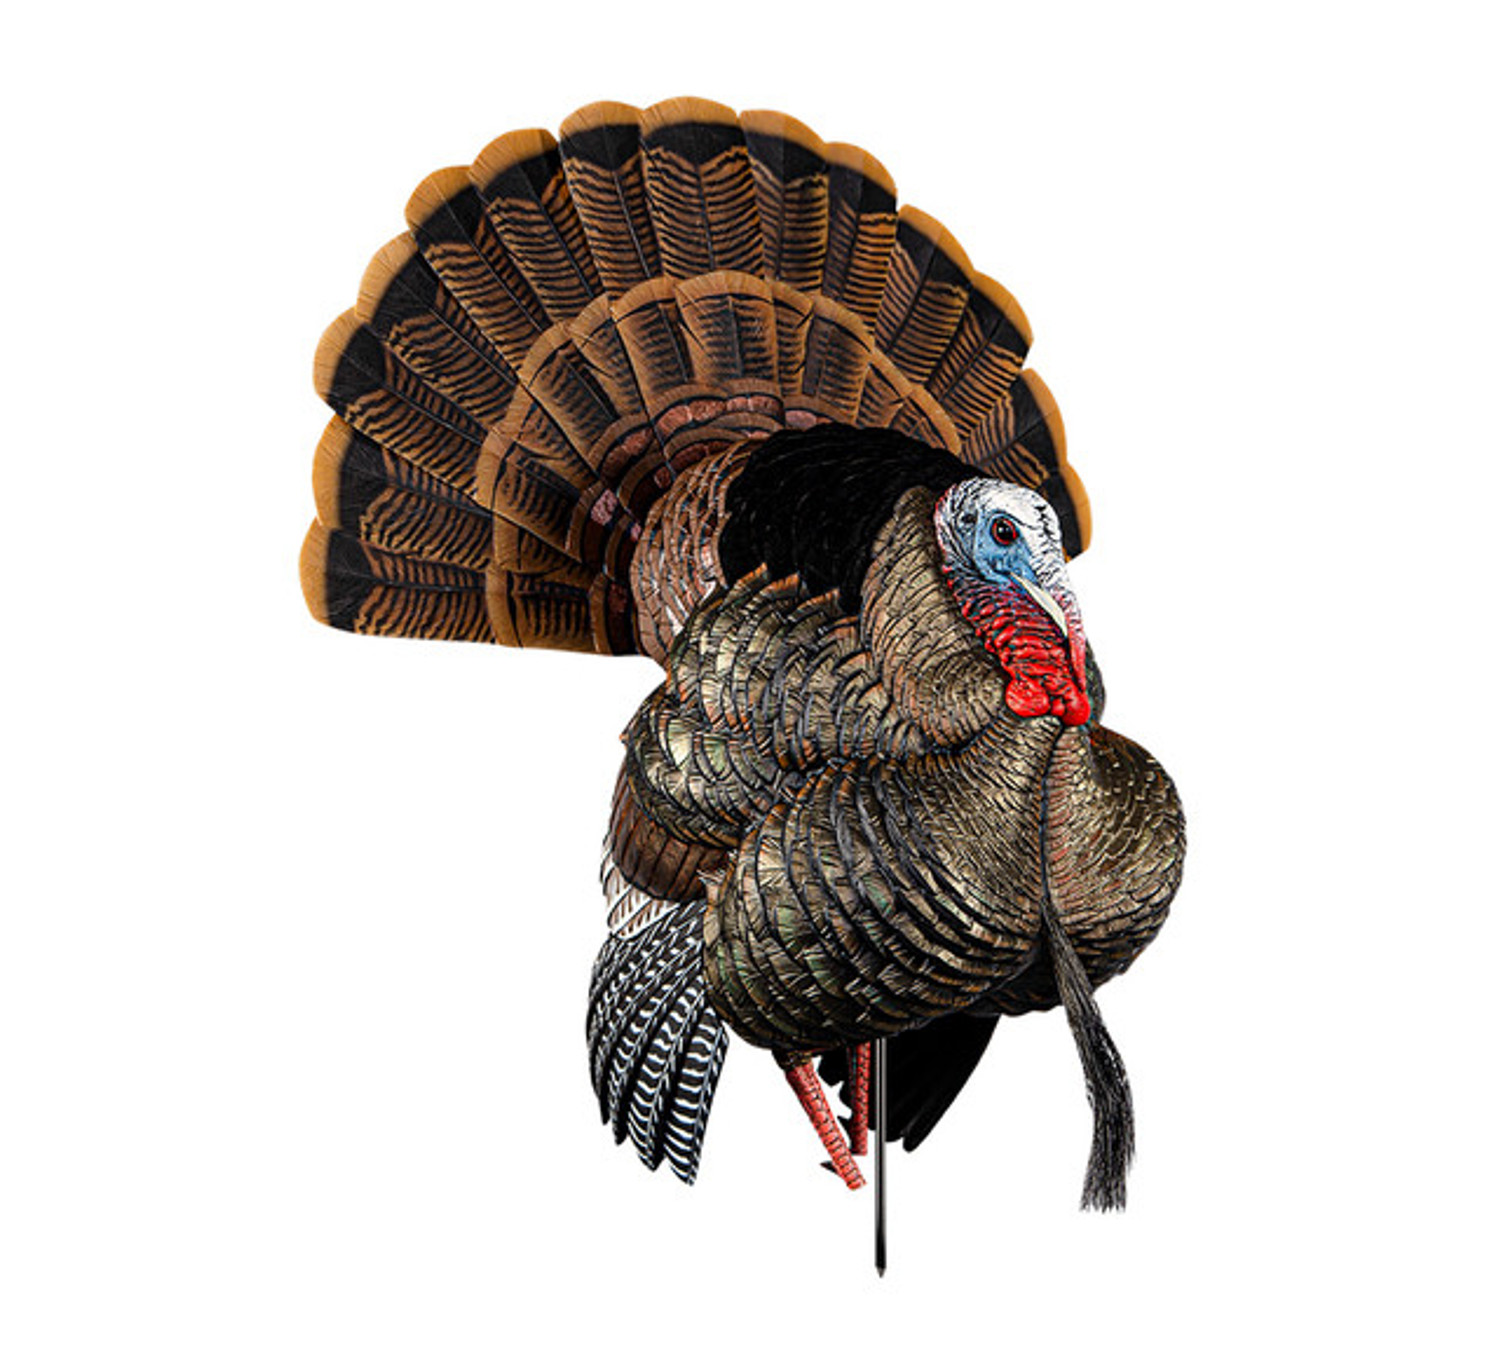 Avian X HDR Tom Turkey Strutter Decoy $144.39 before tax and shipping at Online Outfitters